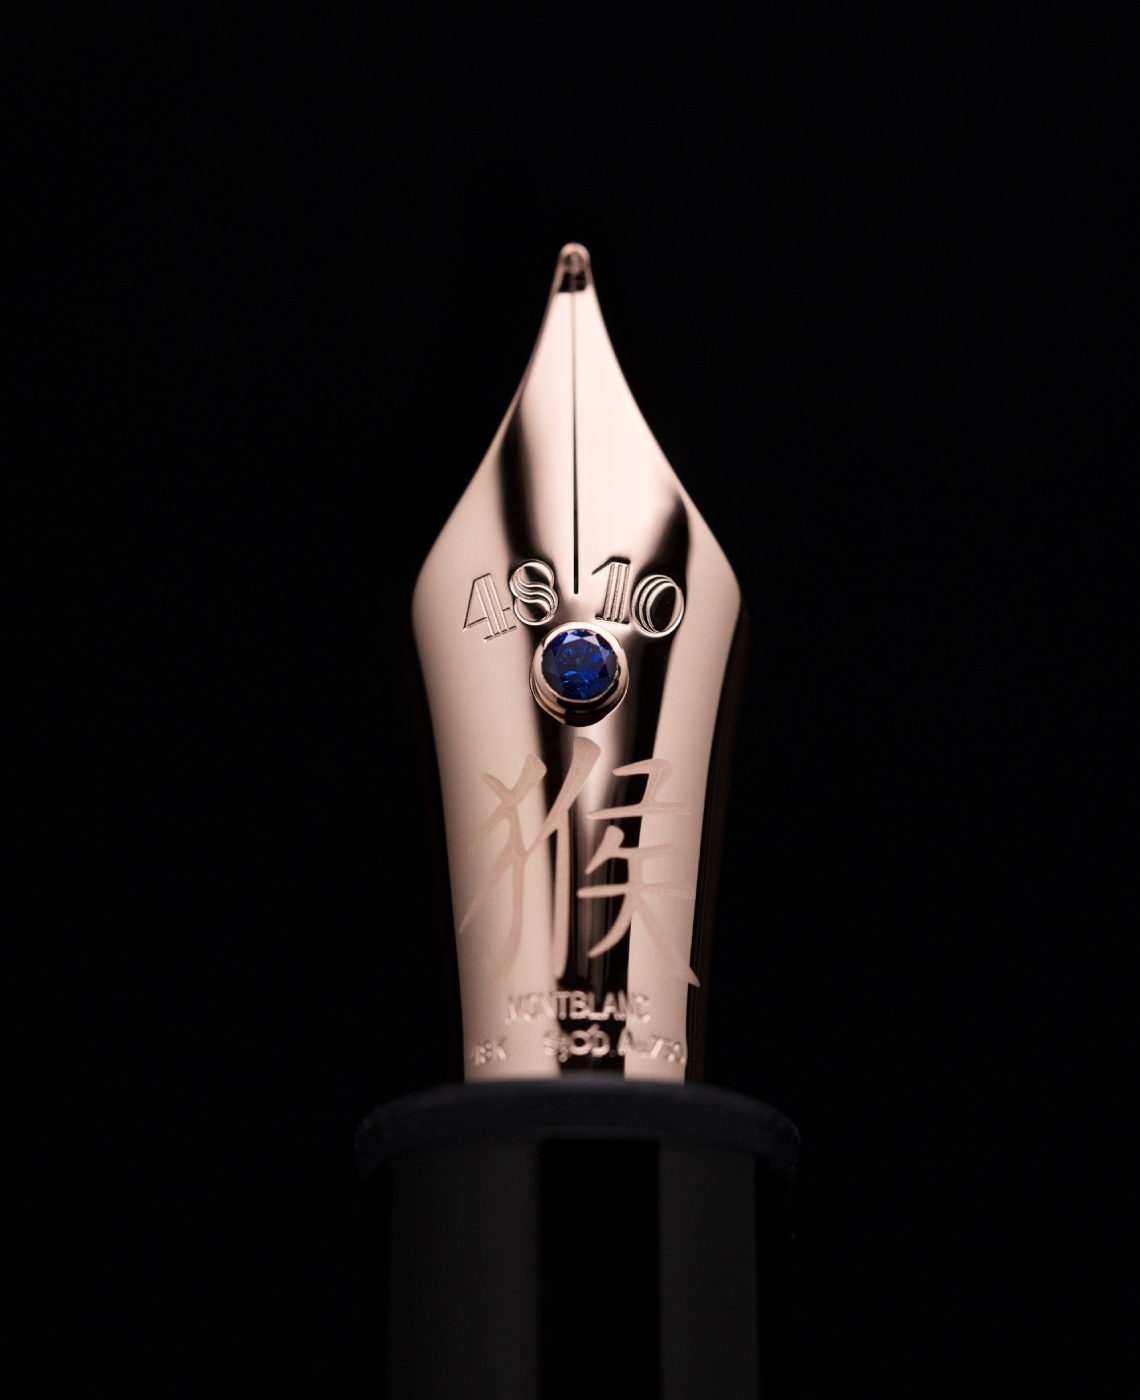 Montblanc pen with engraving on its nib